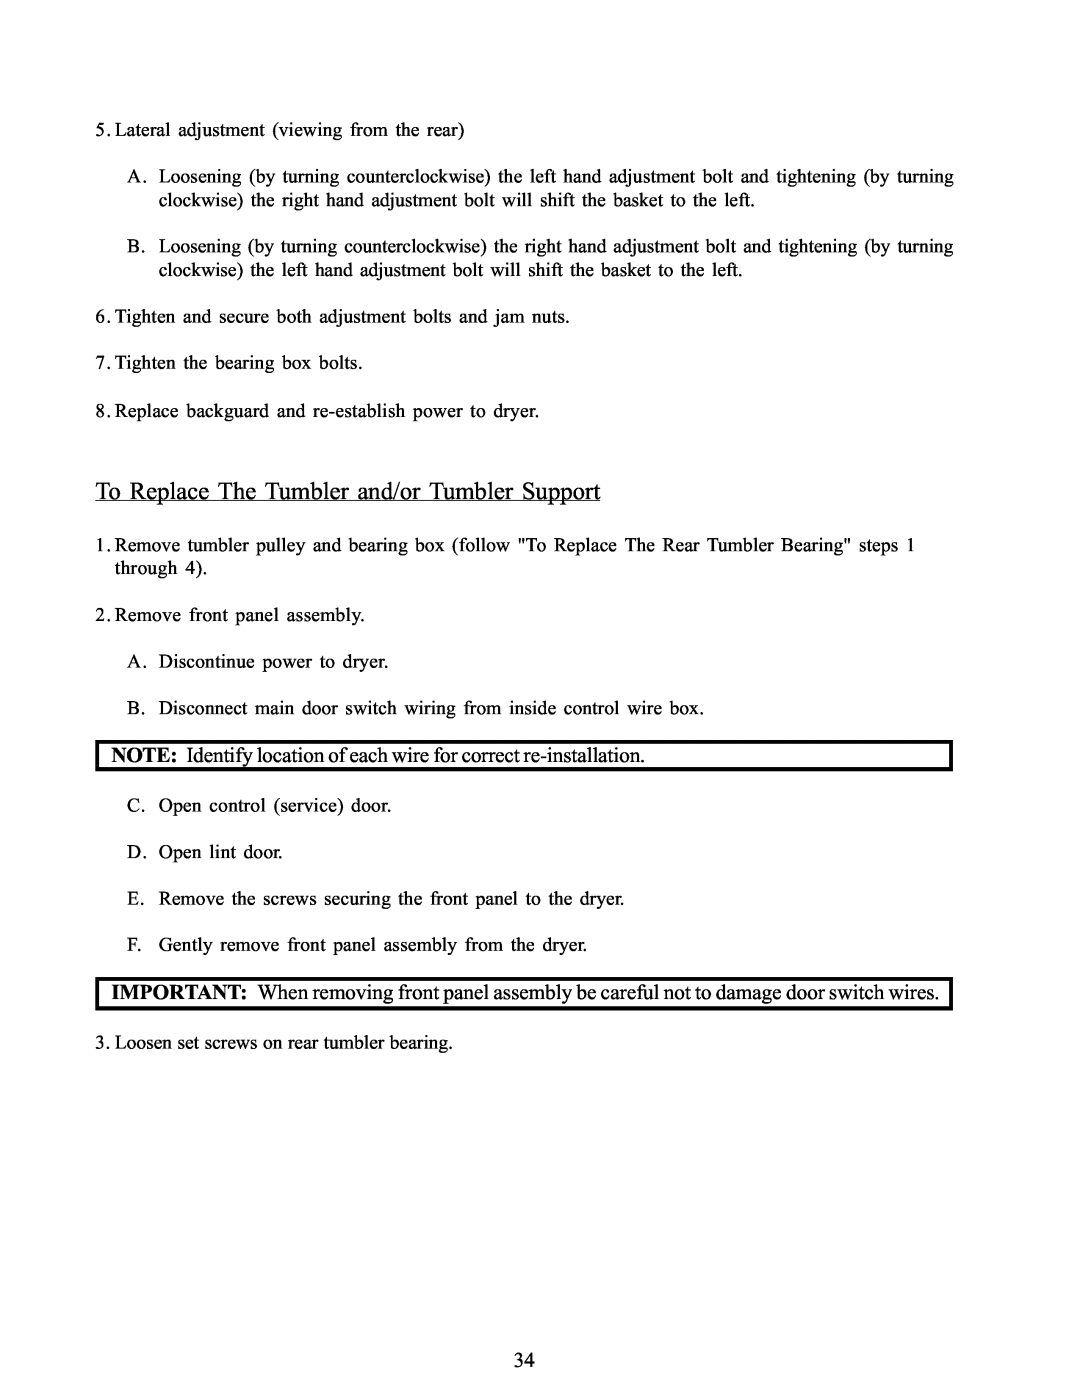 American Dryer Corp WDA-385 service manual To Replace The Tumbler and/or Tumbler Support 